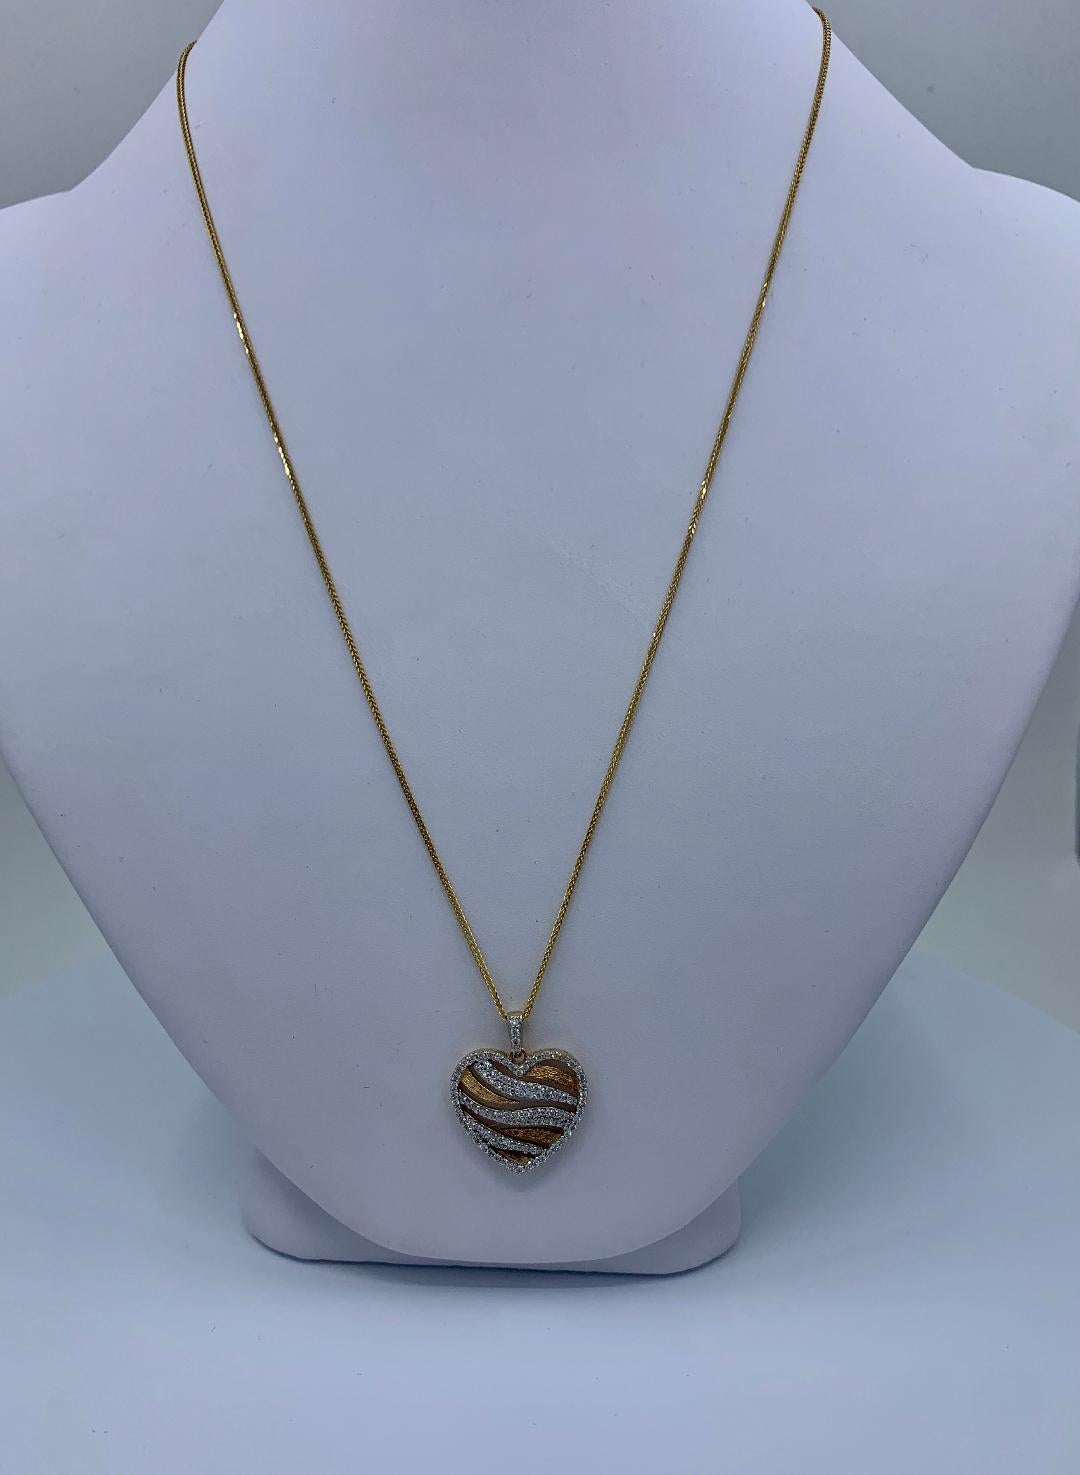 Stylish Pave Diamond Zebra Stripe Heart Pendant Two-Tone Yellow Gold with Chain In Excellent Condition For Sale In Tustin, CA